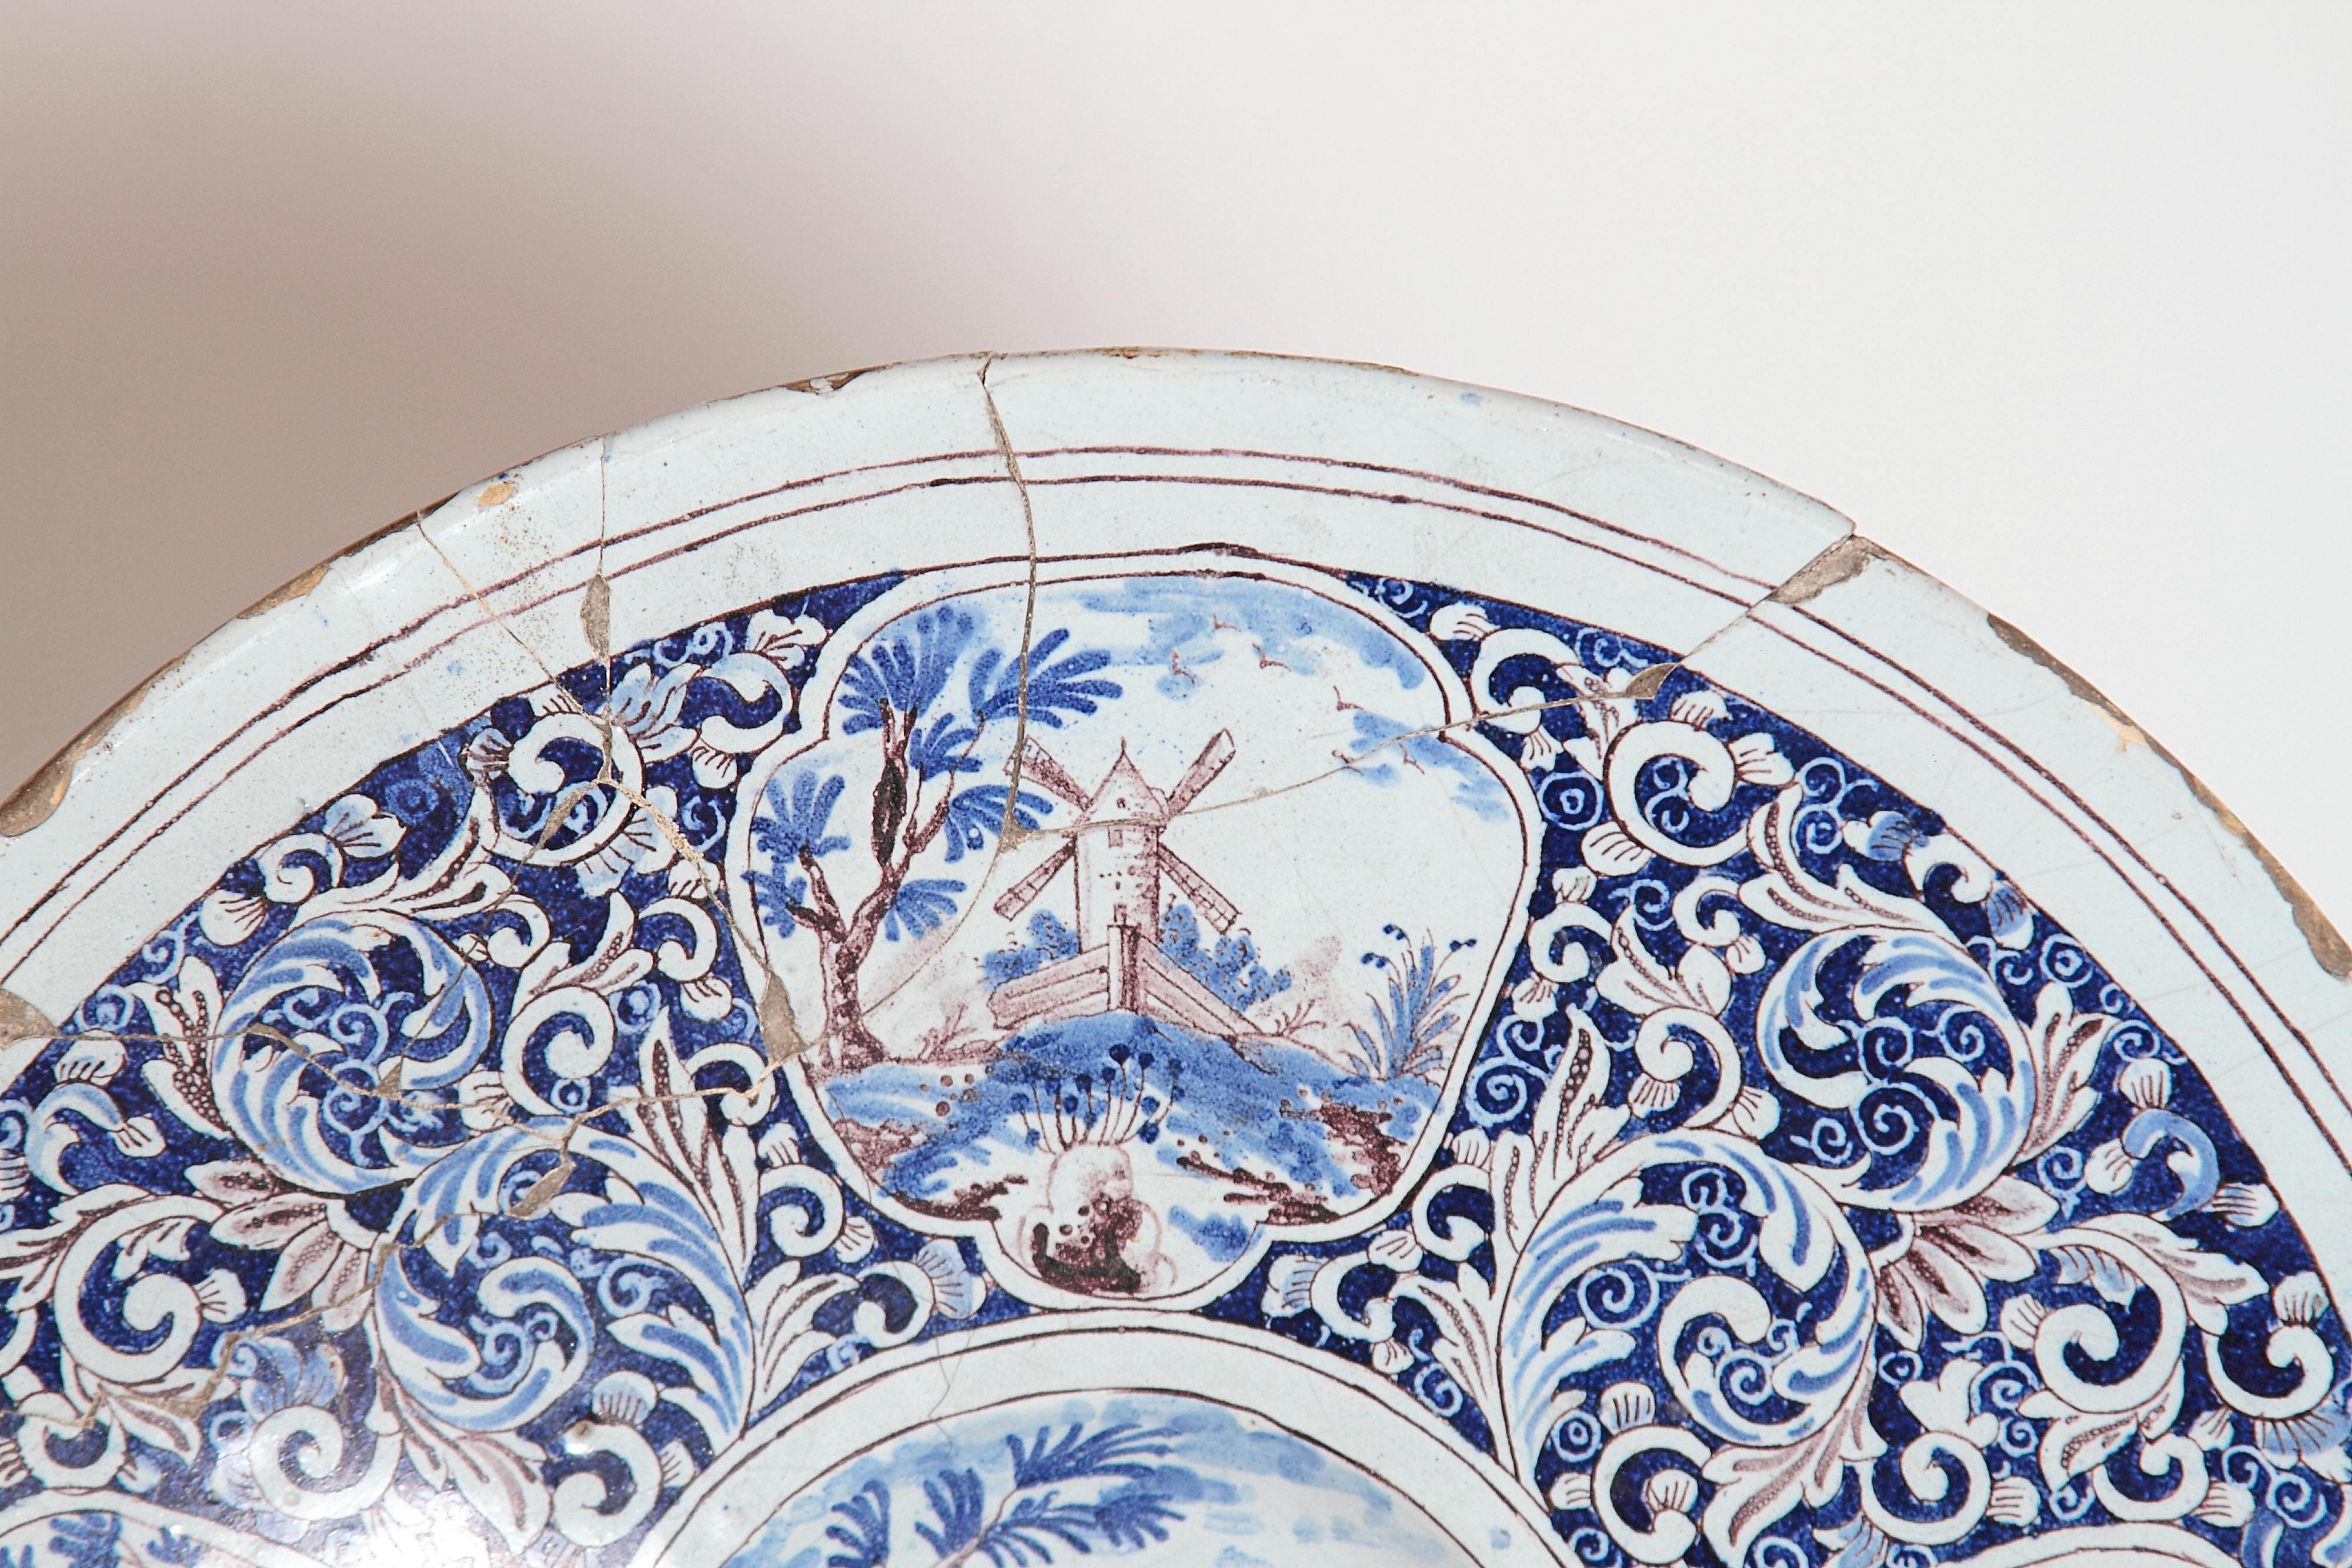 European A Large 18th Century Delft Faience Charger with Floral Cartouches For Sale